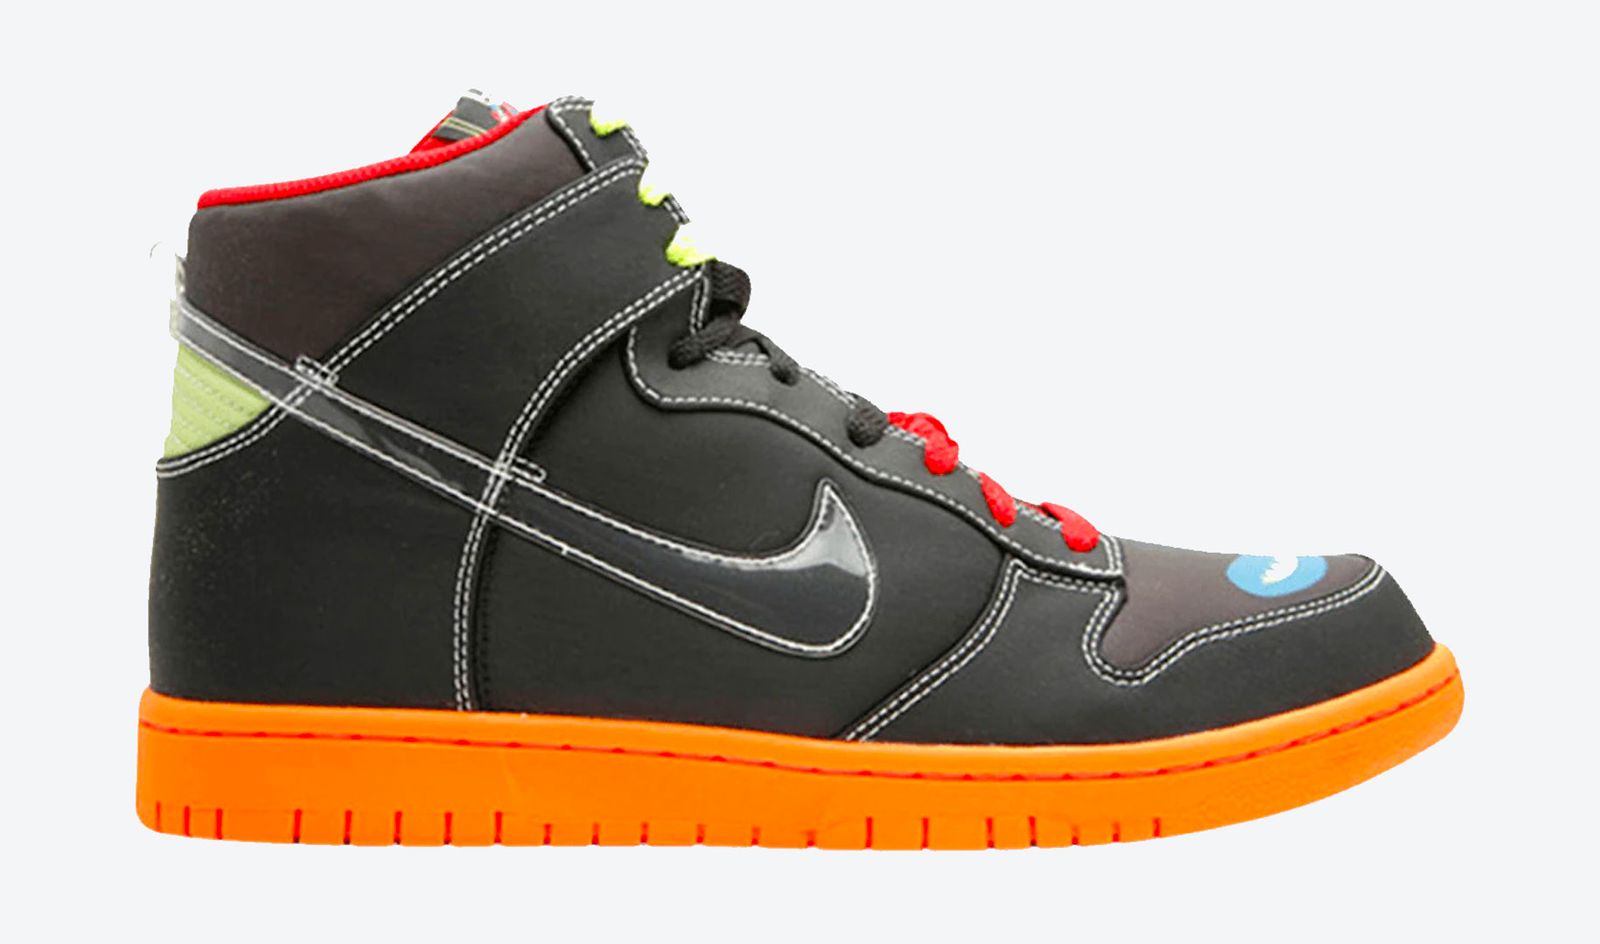 Nike Dunk High "Casette Playa" product image of a black sneaker with an orange midsole and red and yellow accents.